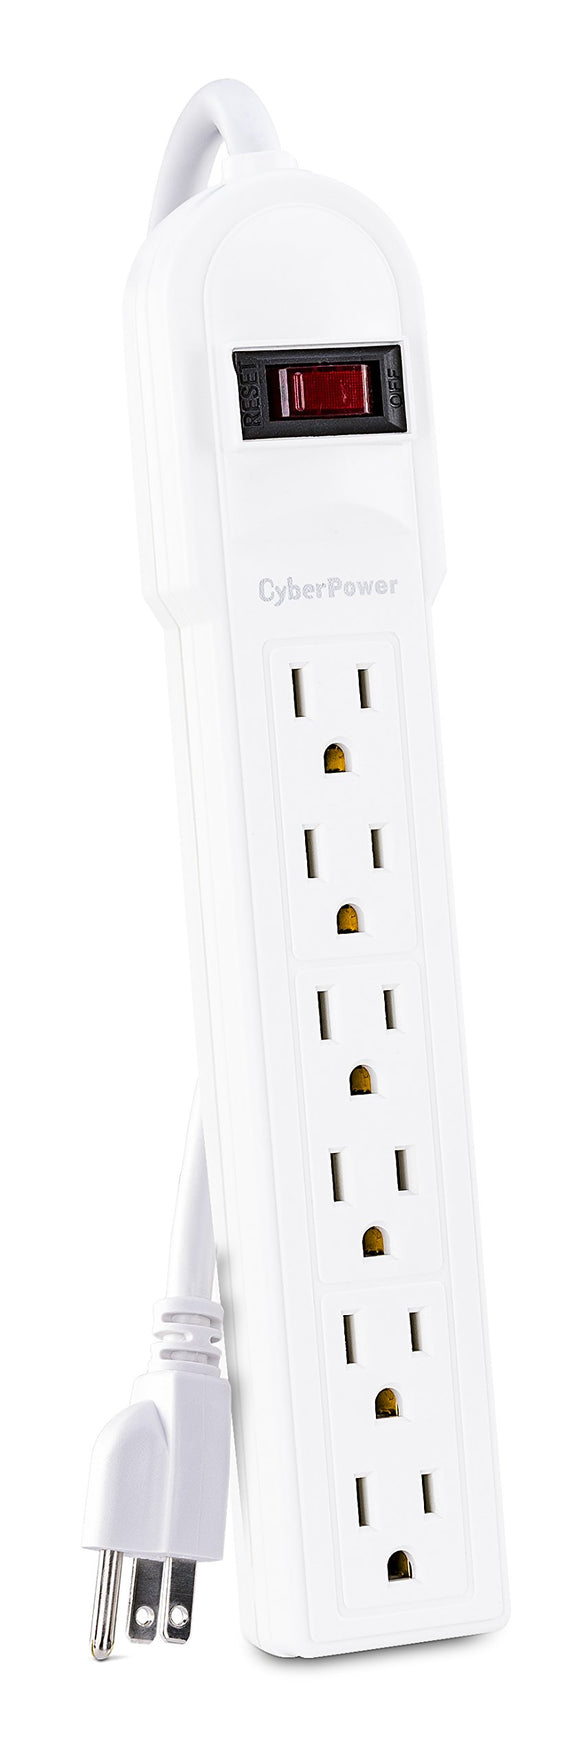 CyberPower CSB606W Essential Surge Protector, 900J/125V, 6 Outlets, 6ft Power Cord